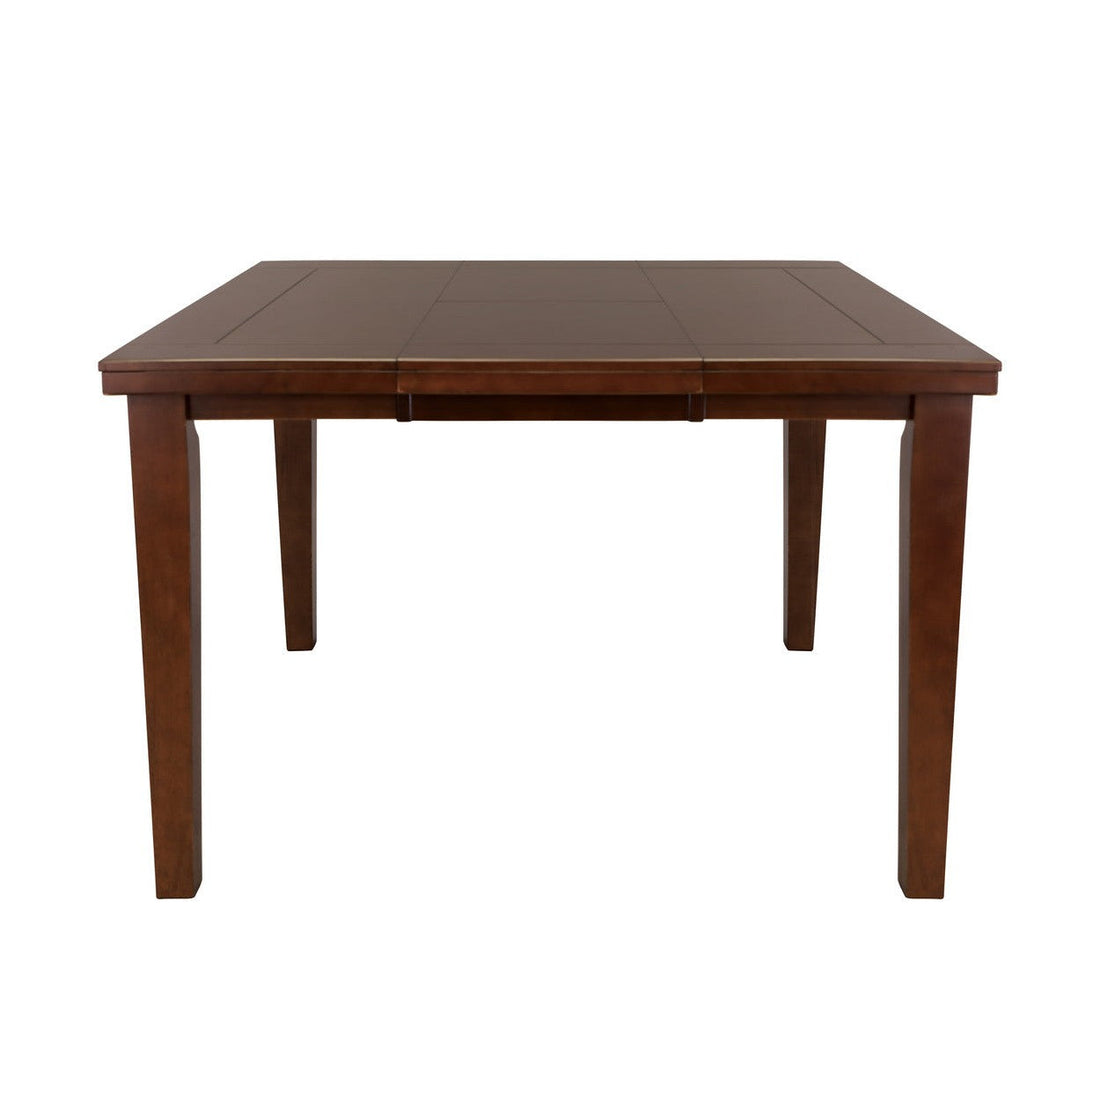 SQ COUNTER HEIGHT TABLE, BUTTERFLY LEAF 586-36